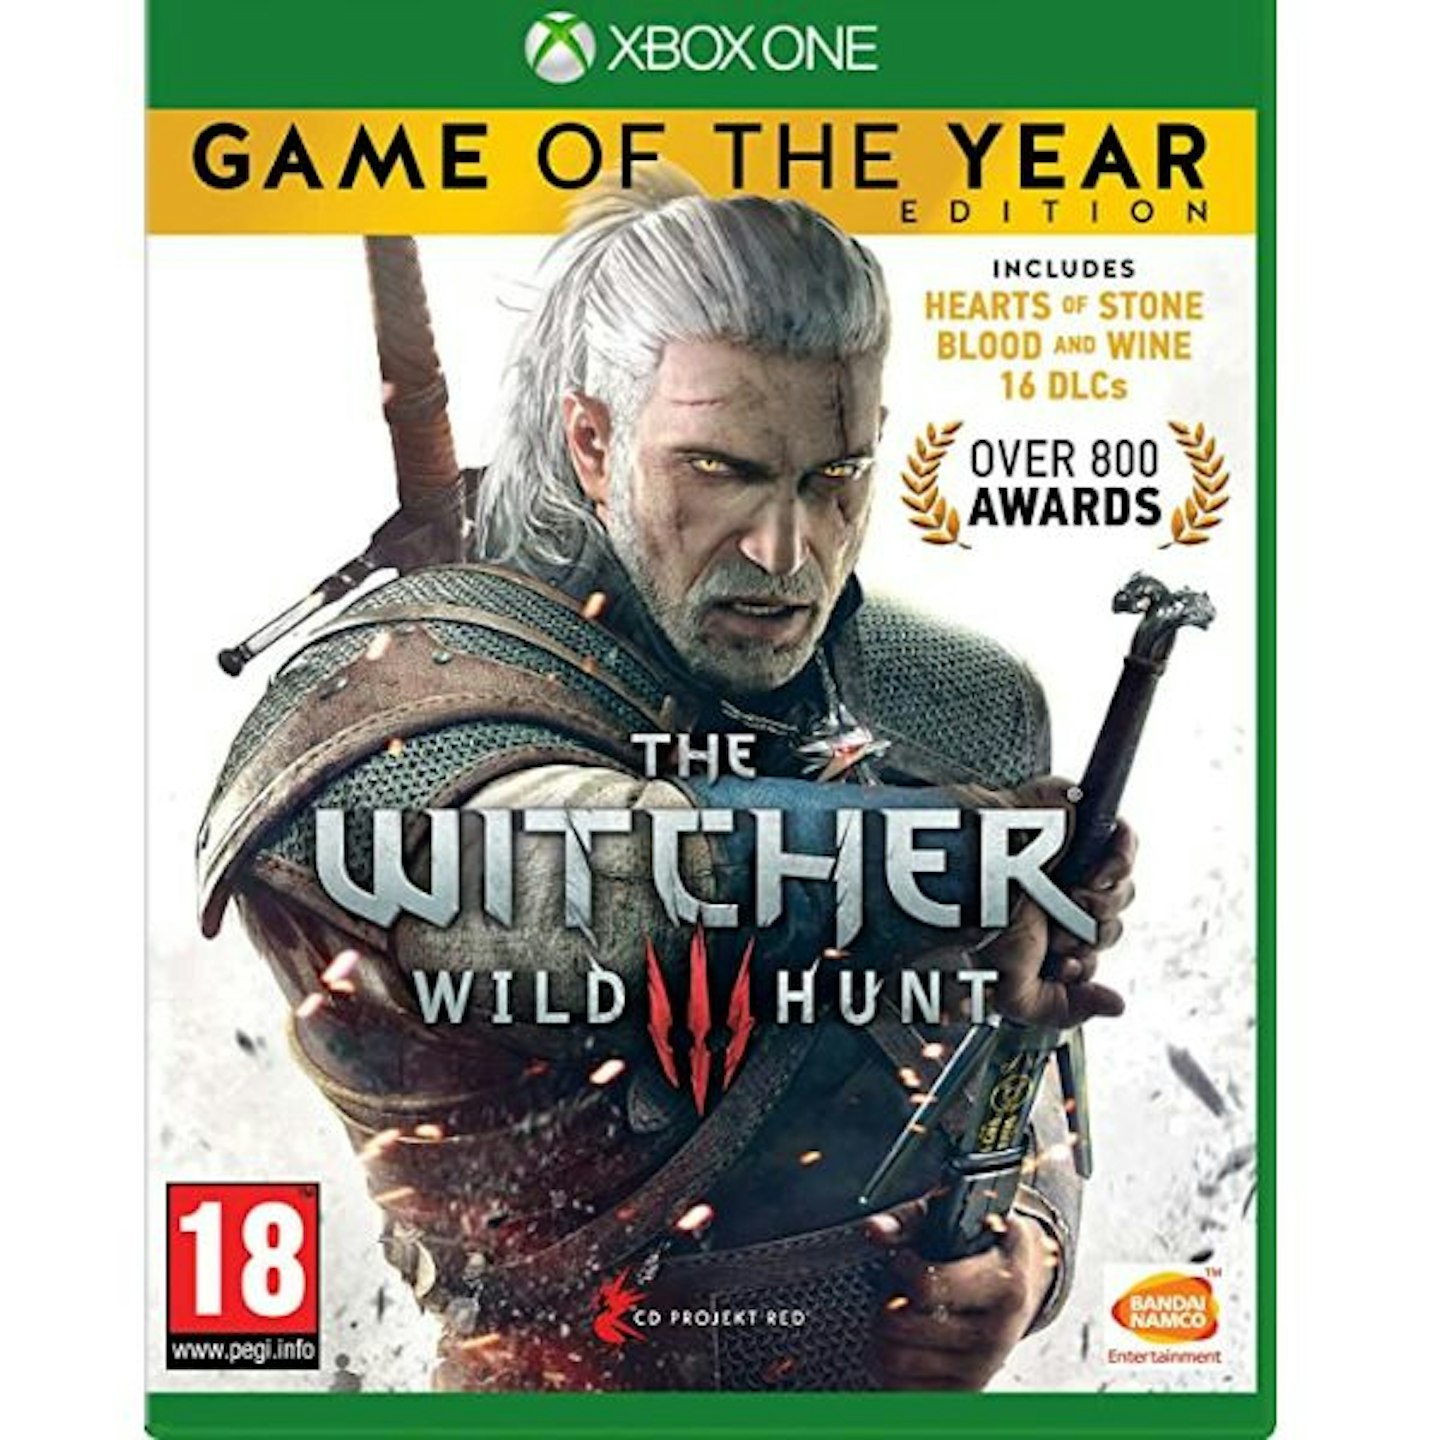 The Witcher 3 (Game of the Year Edition)